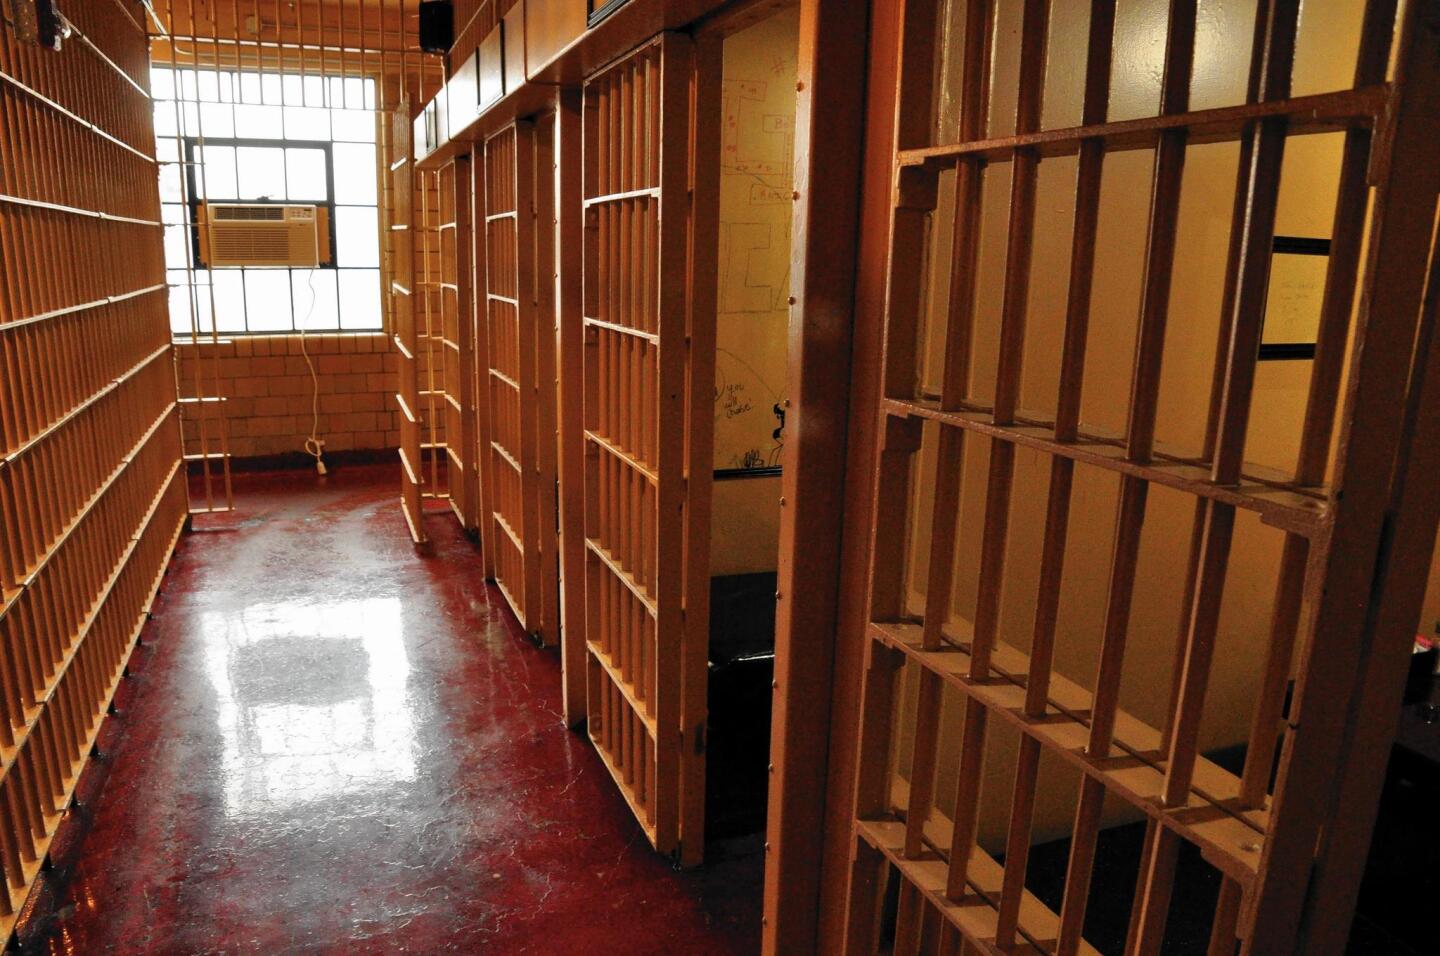 A corridor in the old Boone County Jail in Lebanon, Ind., opens onto individual cells where diners are seated.